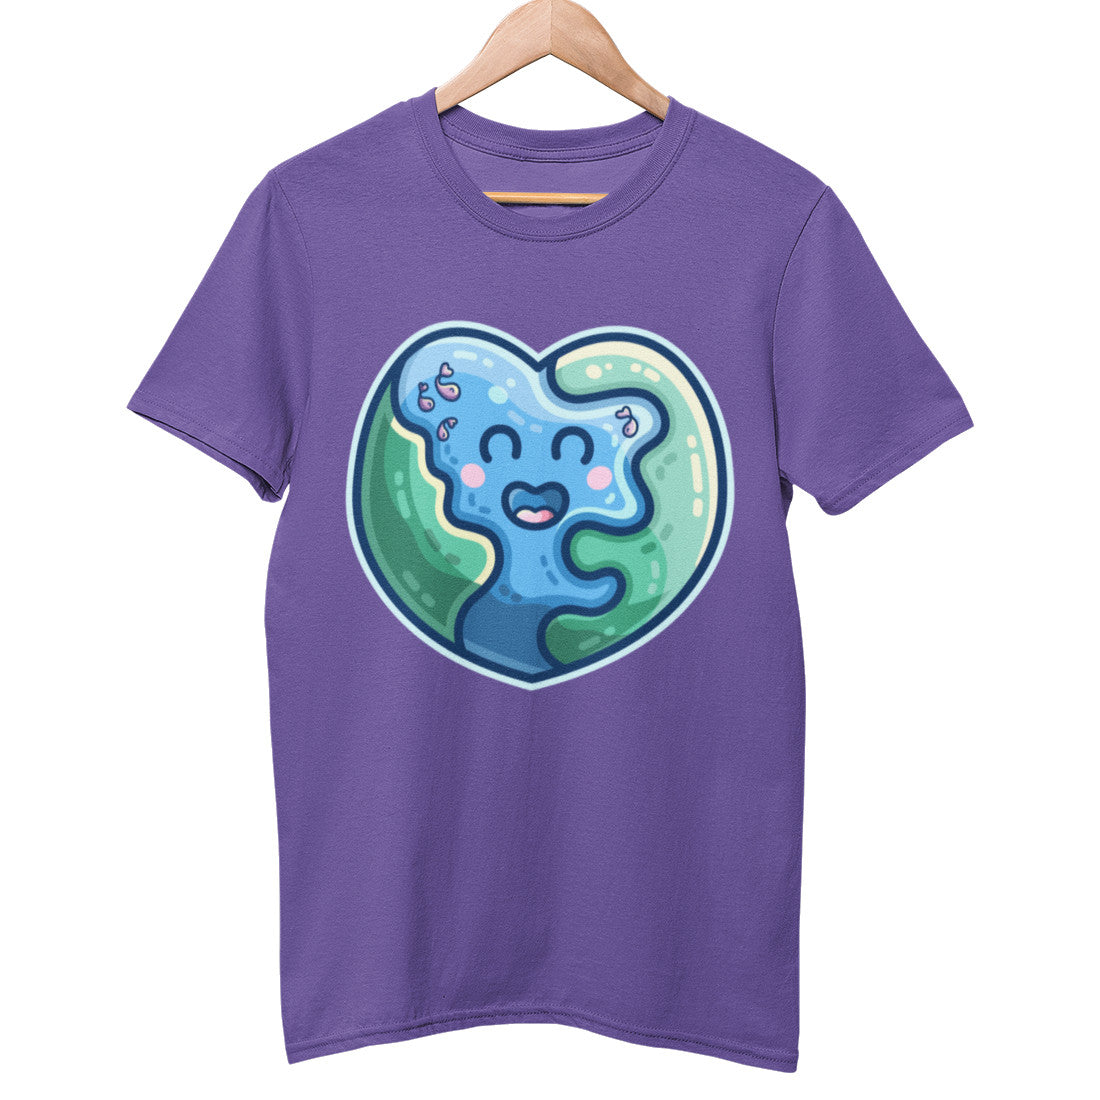 A purple unisex crewneck t-shirt on a hanger with a design on its chest of a kawaii cute blue and green heart shaped Earth like planet, with a few fish in the oceans